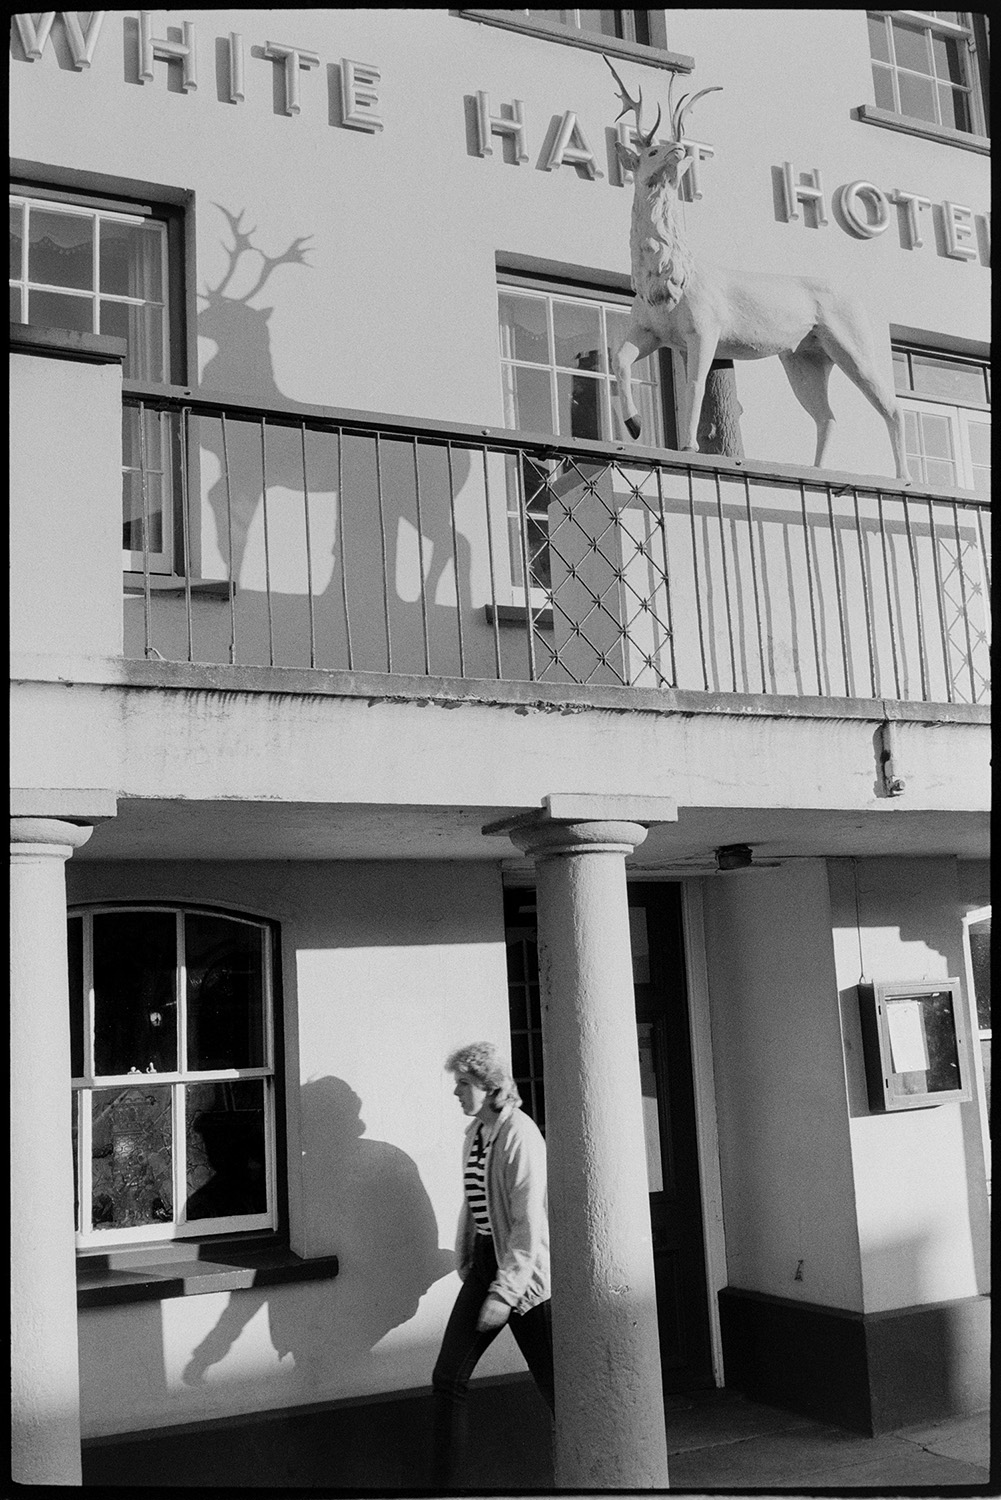 Front of hotel and street, porch and railings.
[Front entrance of the White Hart Hotel, Okehampton, with a statue of a deer mounted on a balcony supported by pillars. A woman is walking past the entrance under the balcony.]